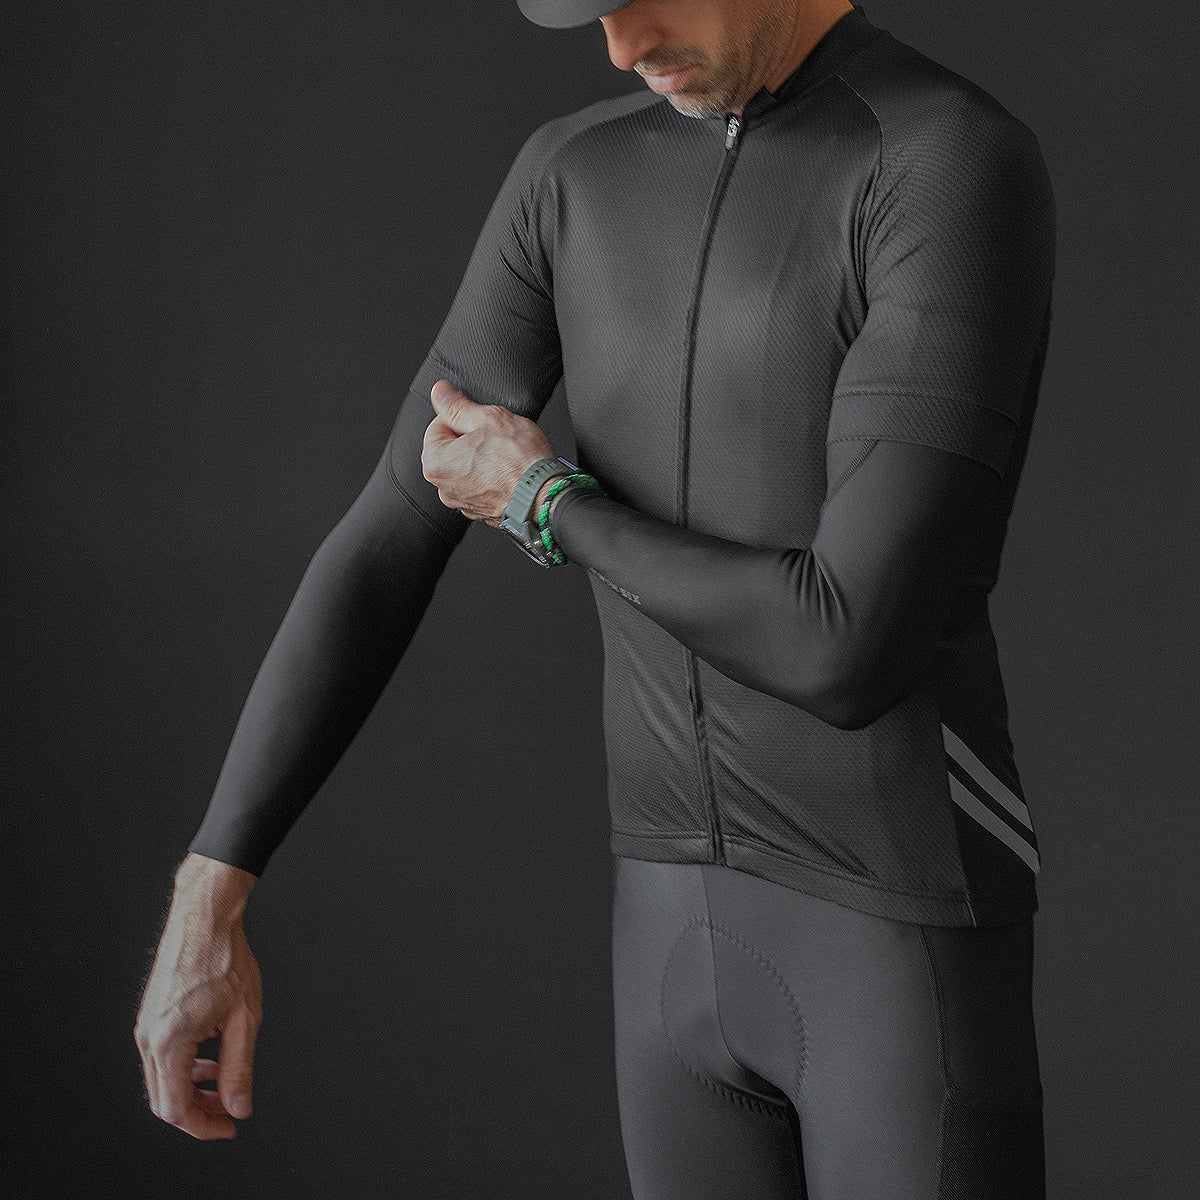 New Thermal Arm Warmers